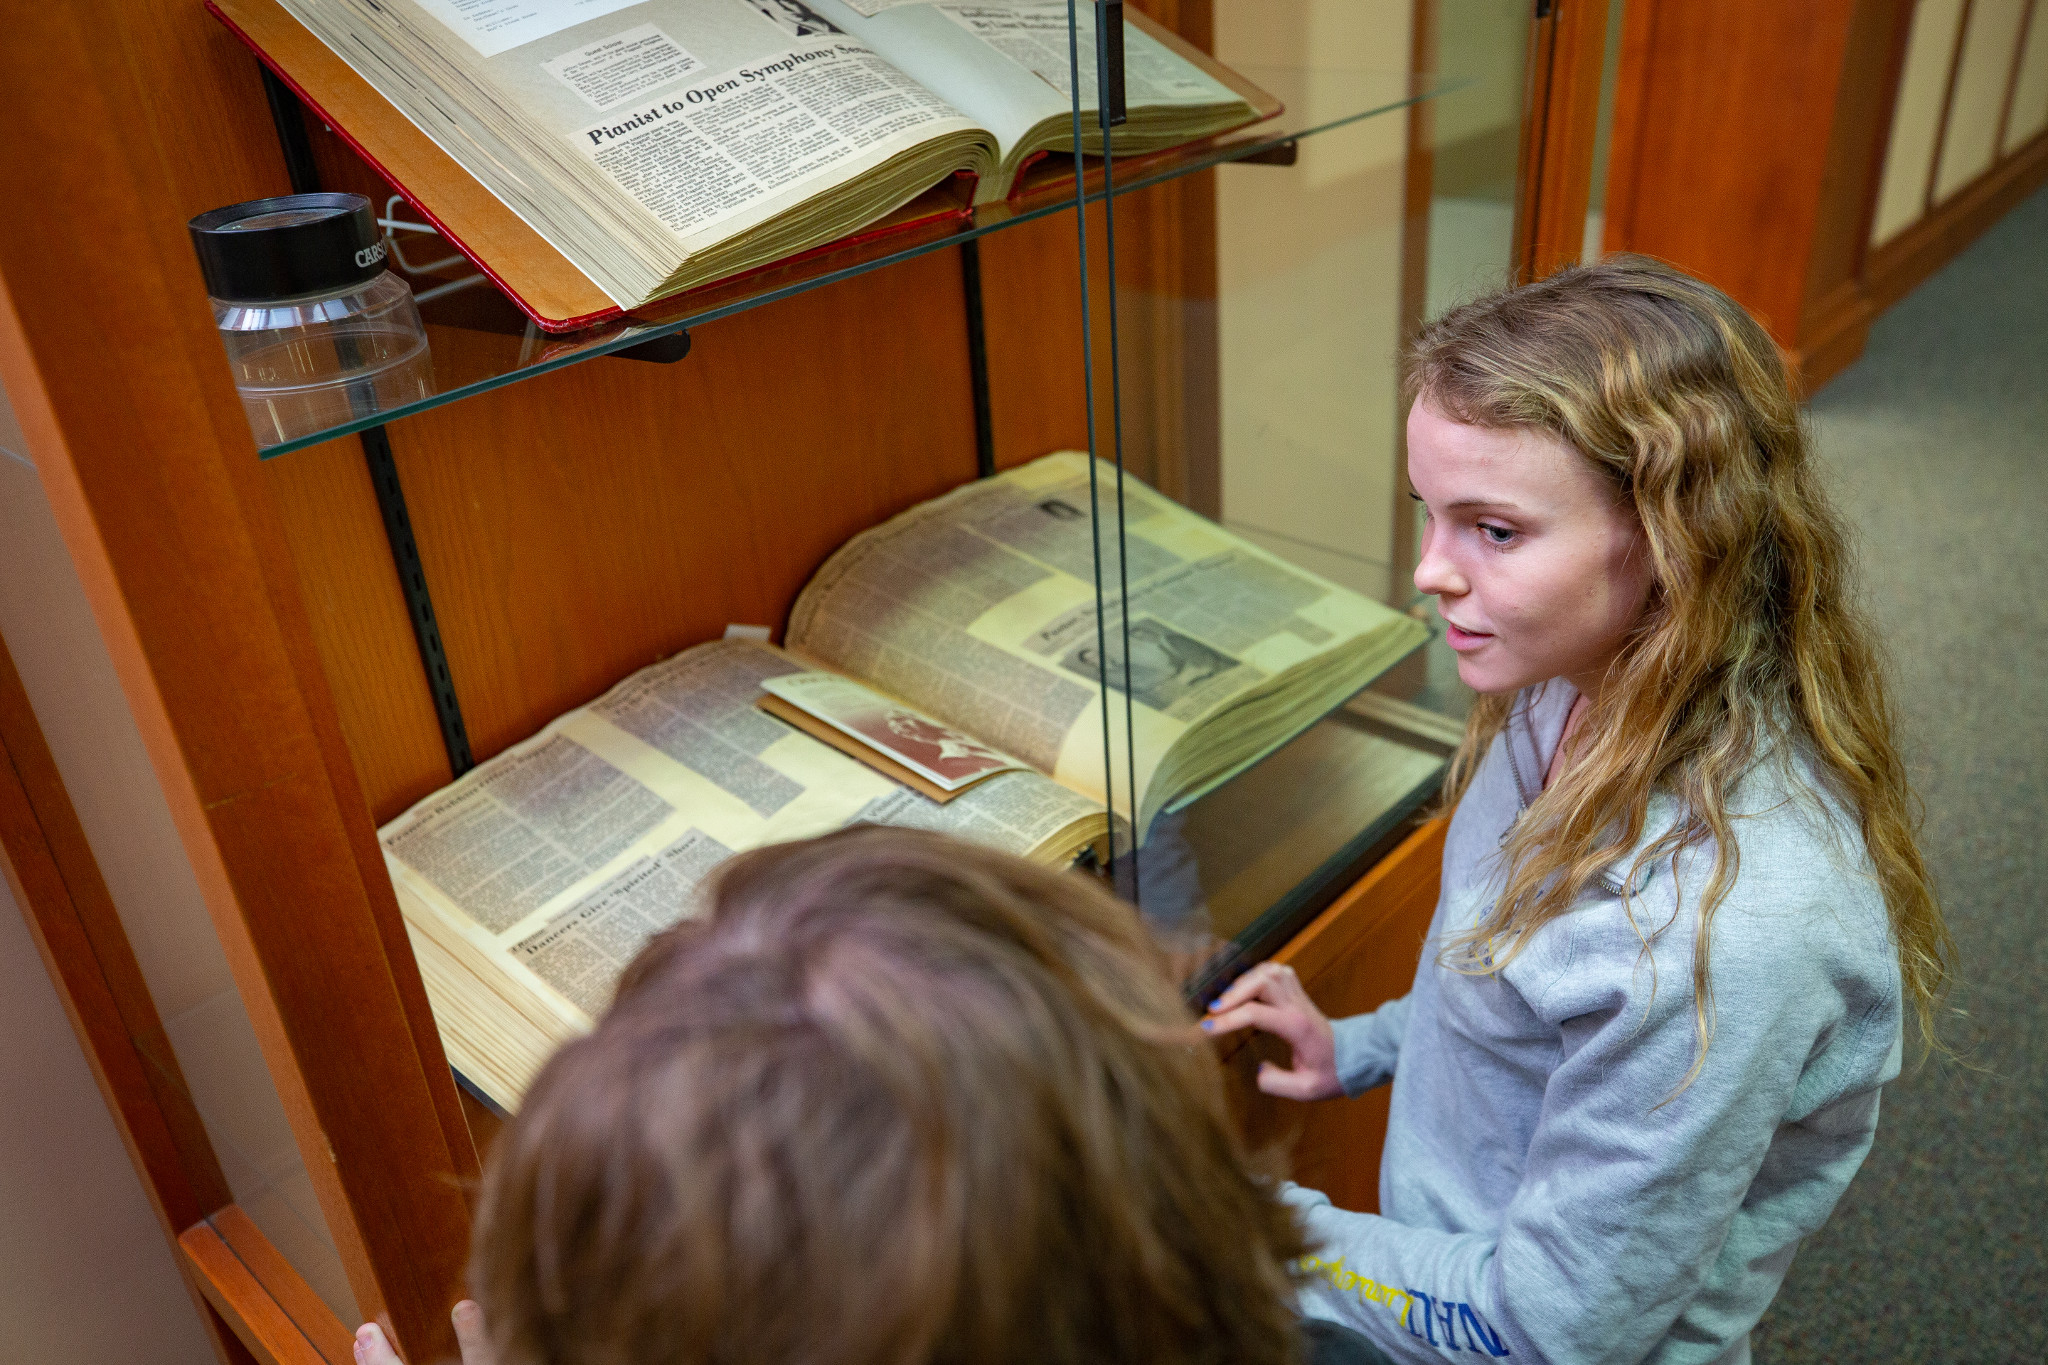 Students read historic textbook in glass display